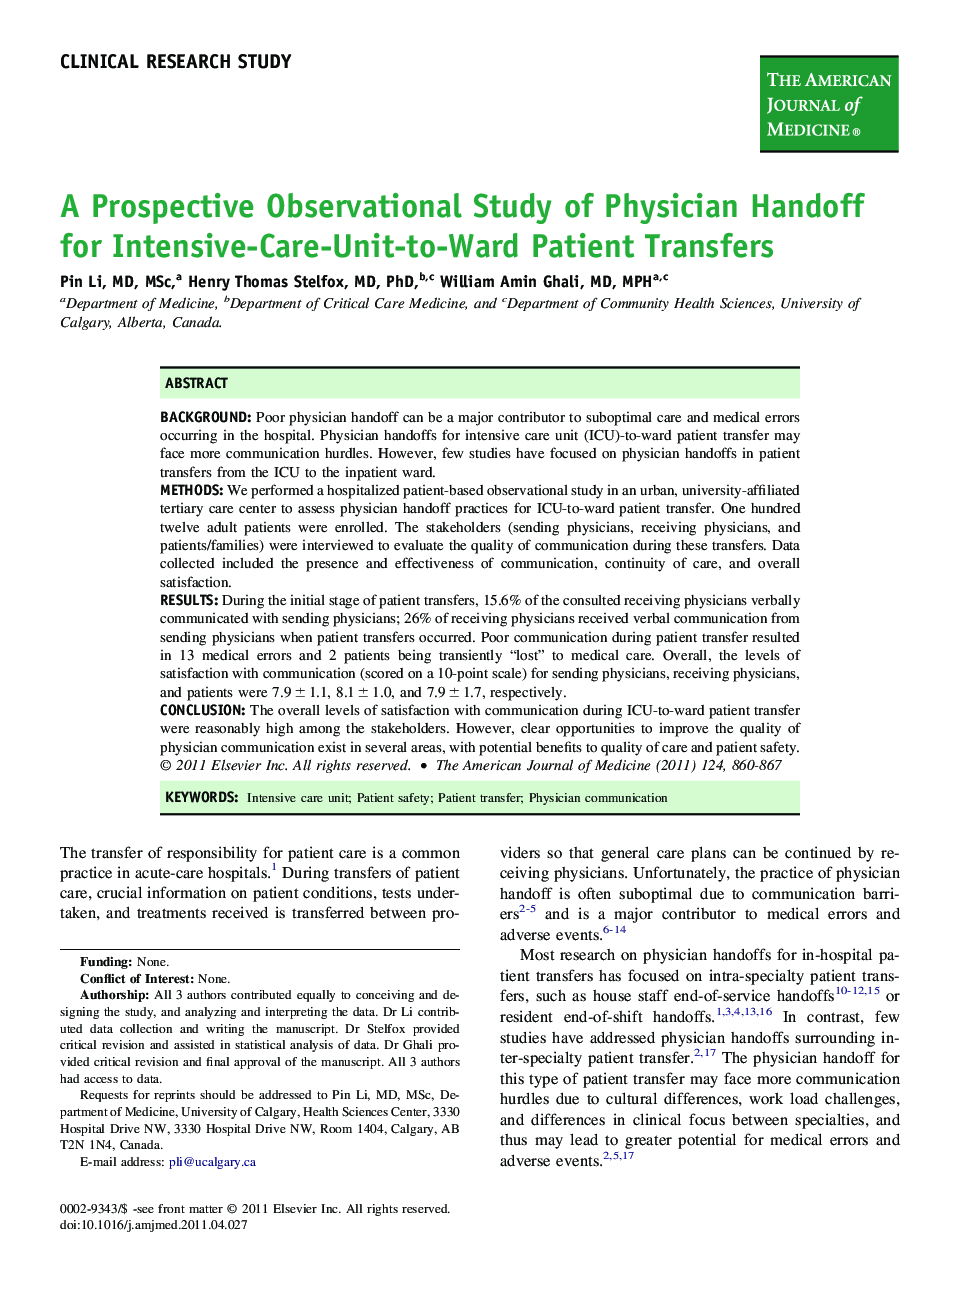 A Prospective Observational Study of Physician Handoff for Intensive-Care-Unit-to-Ward Patient Transfers 